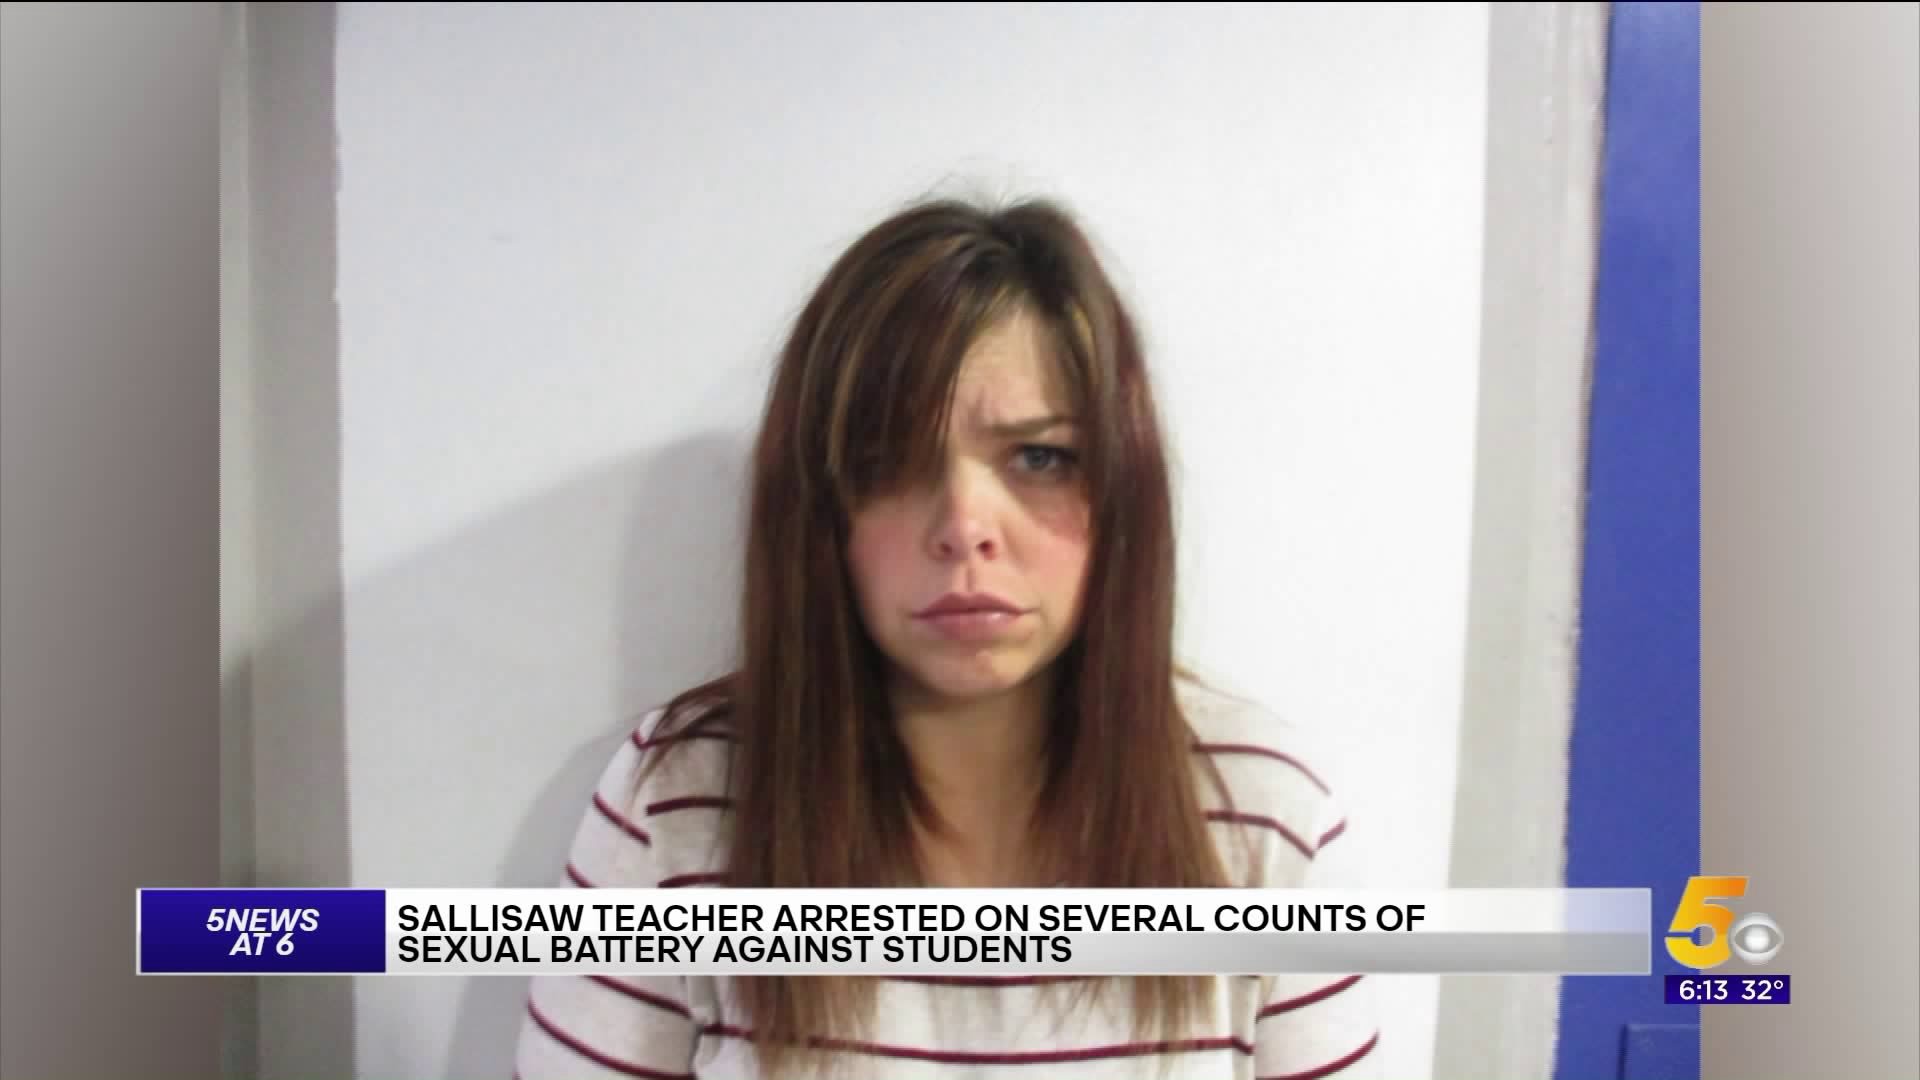 Central Public School Teacher Arrested For Sexual Battery Against Students